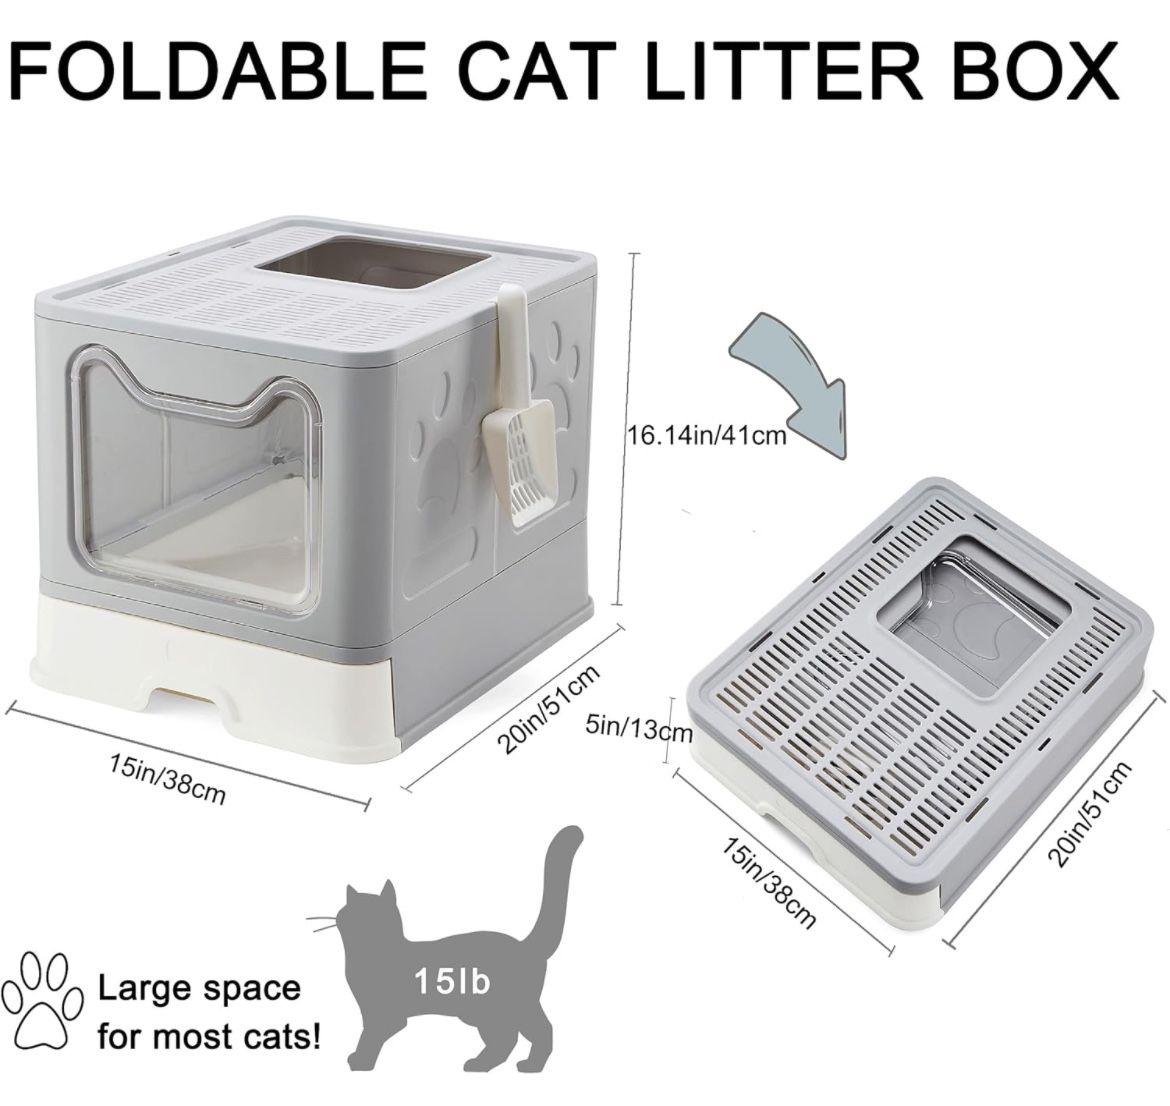 Foldable Cat Litter Box with Lid